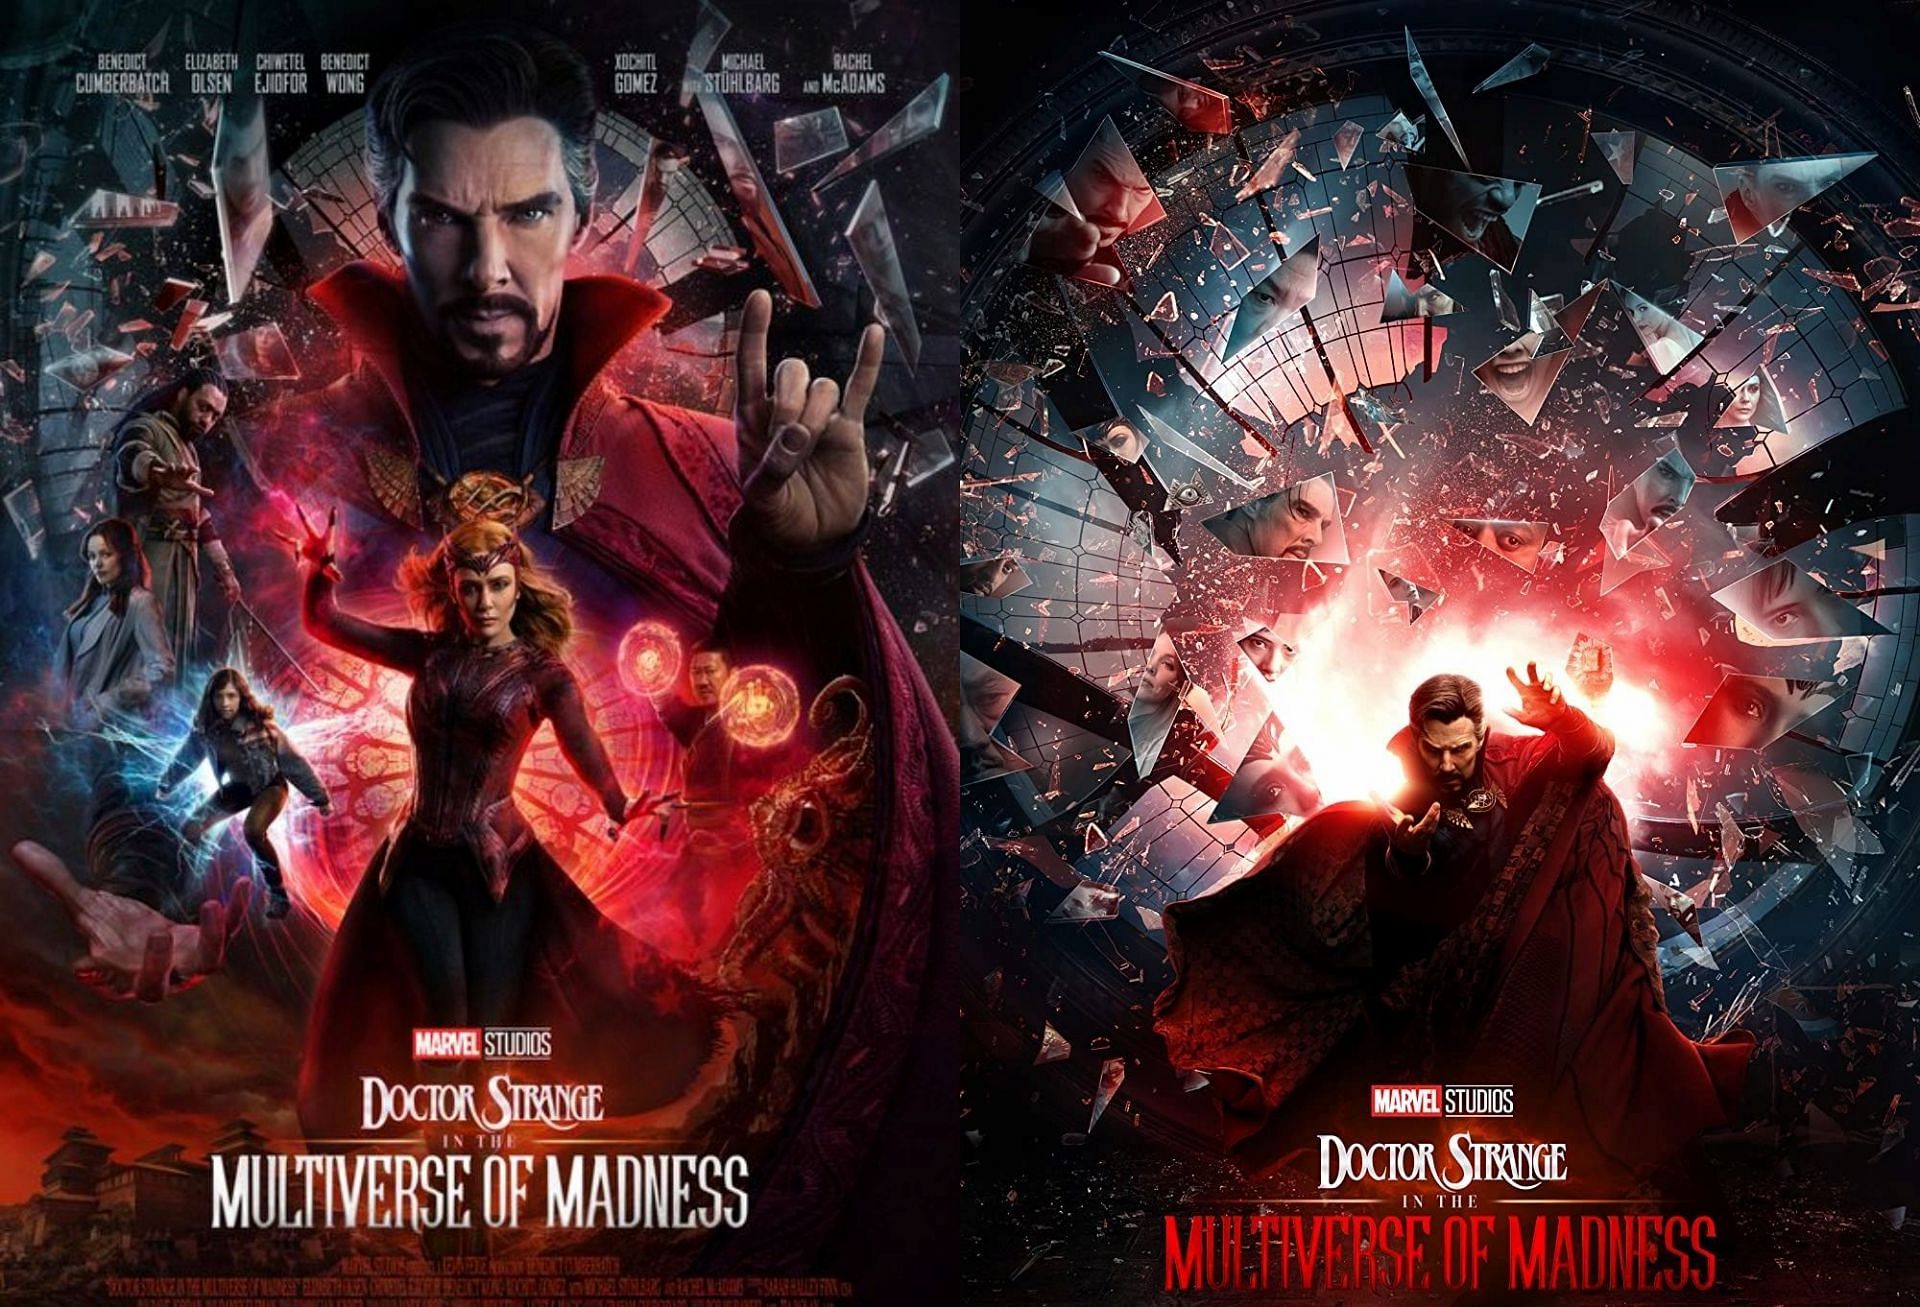 Doctor Strange in the Multiverse of Madness official posters (Image via Marvel Studios)